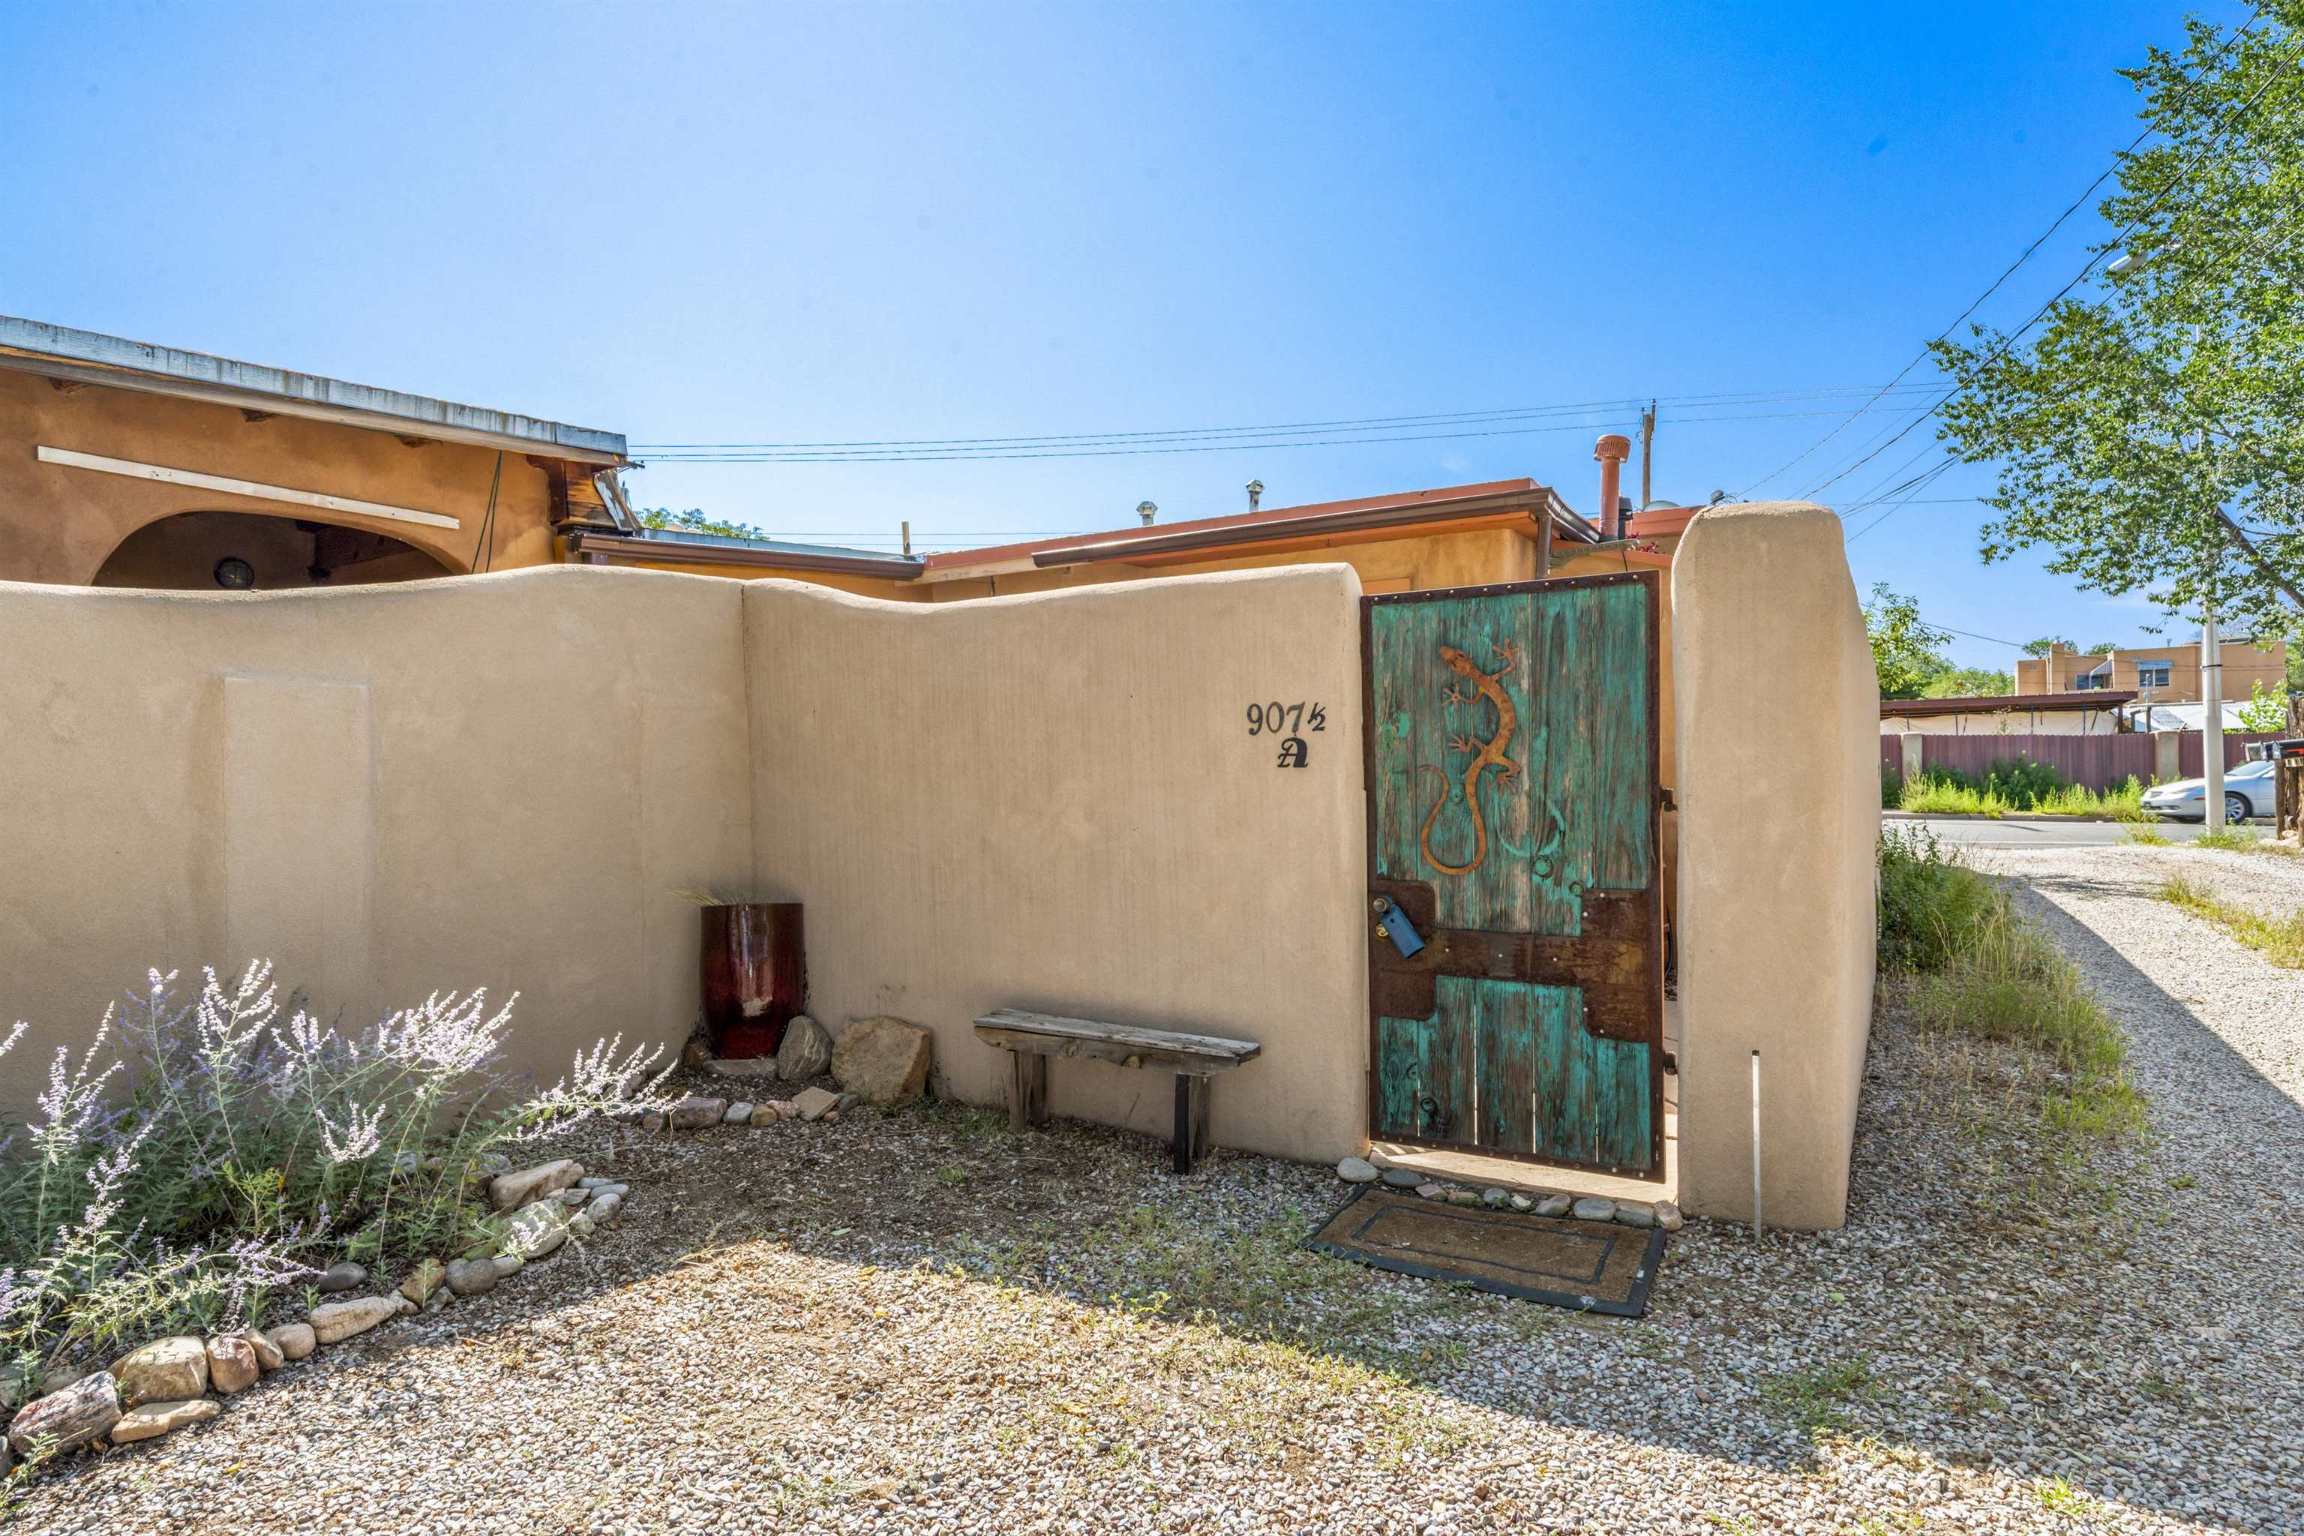 907 1/2 Agua Fria A, Santa Fe, New Mexico 87501, 1 Bedroom Bedrooms, ,1 BathroomBathrooms,Residential,For Sale,907 1/2 Agua Fria A,202103996